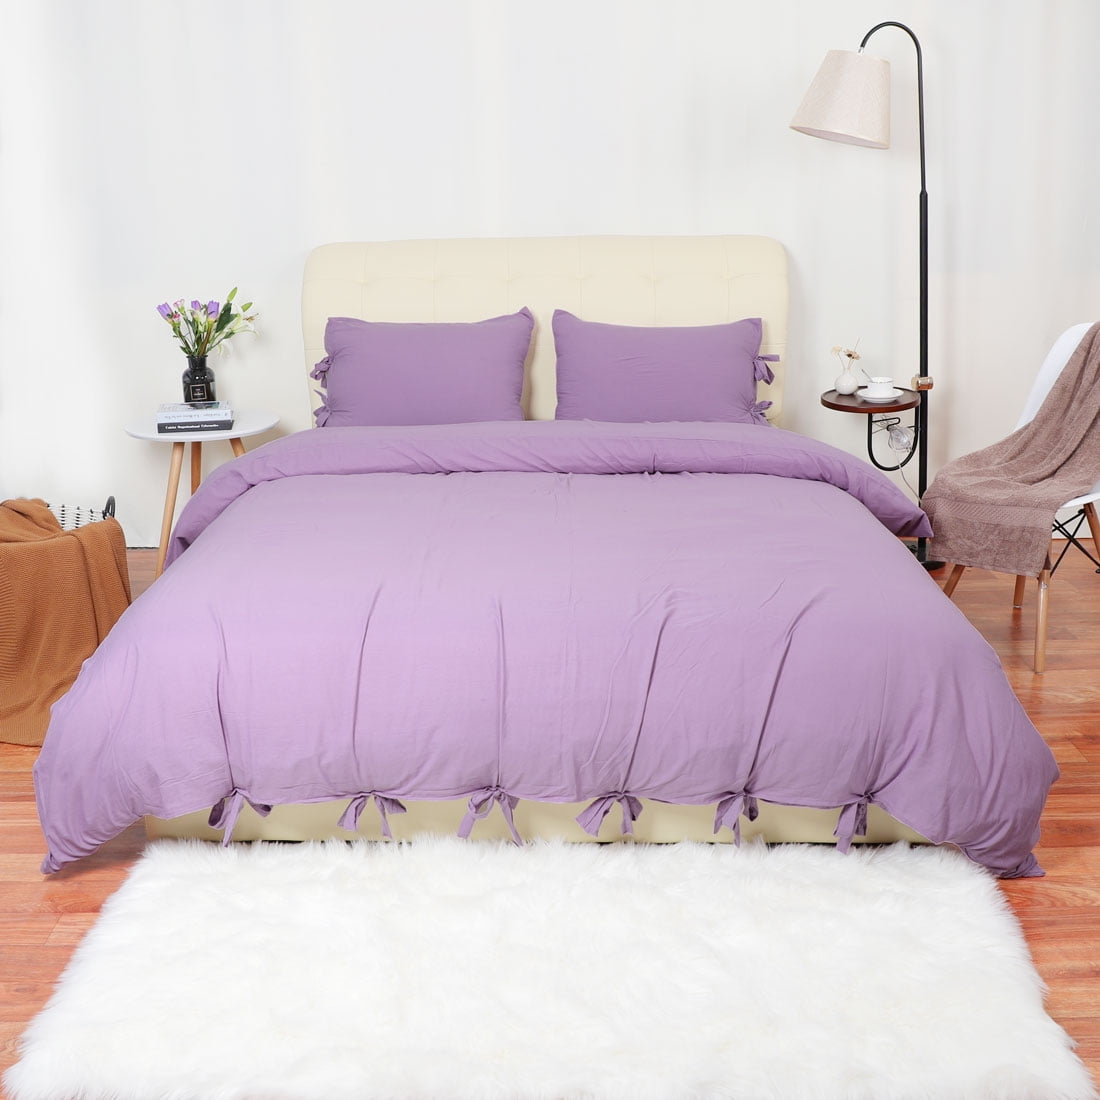 Details about   Purple Bed Sheet 100% Cotton Flat Sheet Pillowcase Cover For Home Dressing 